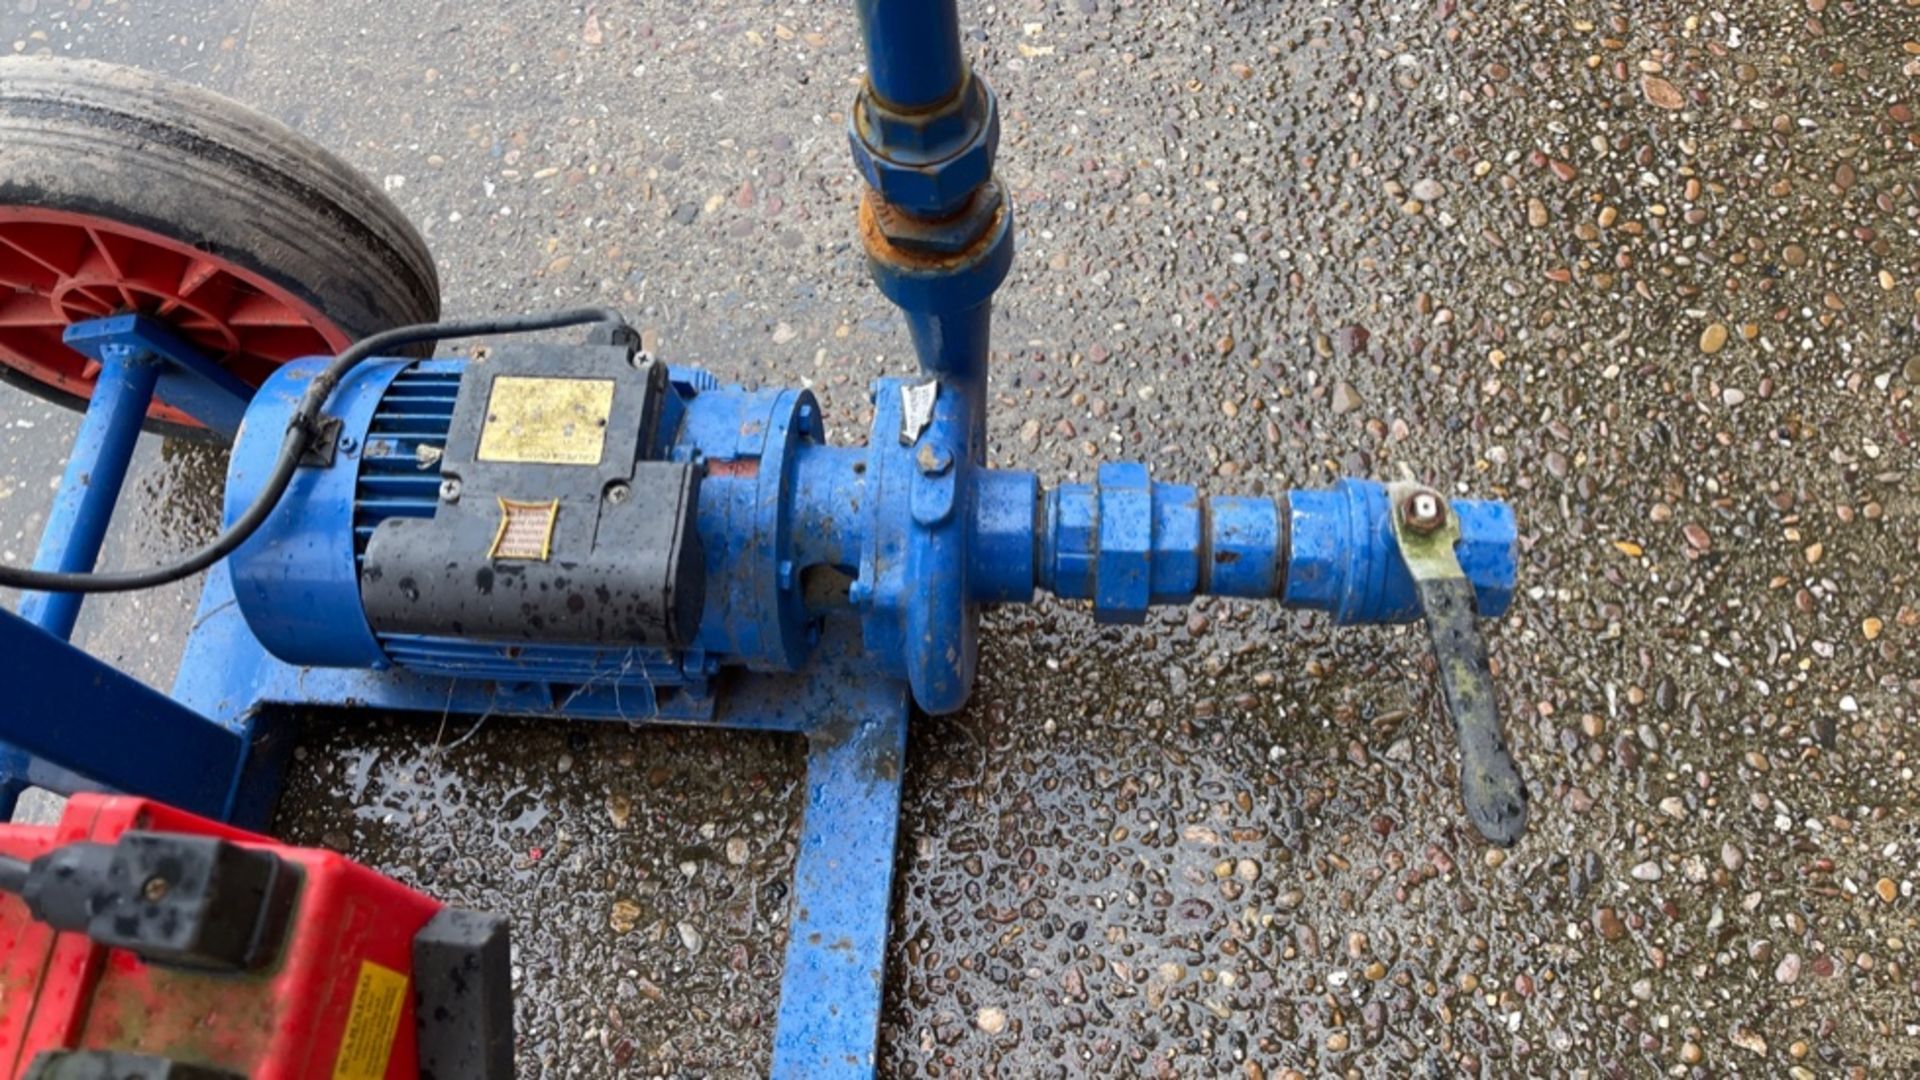 FLOW MECH 2" PUMP ON STAND - Image 5 of 5